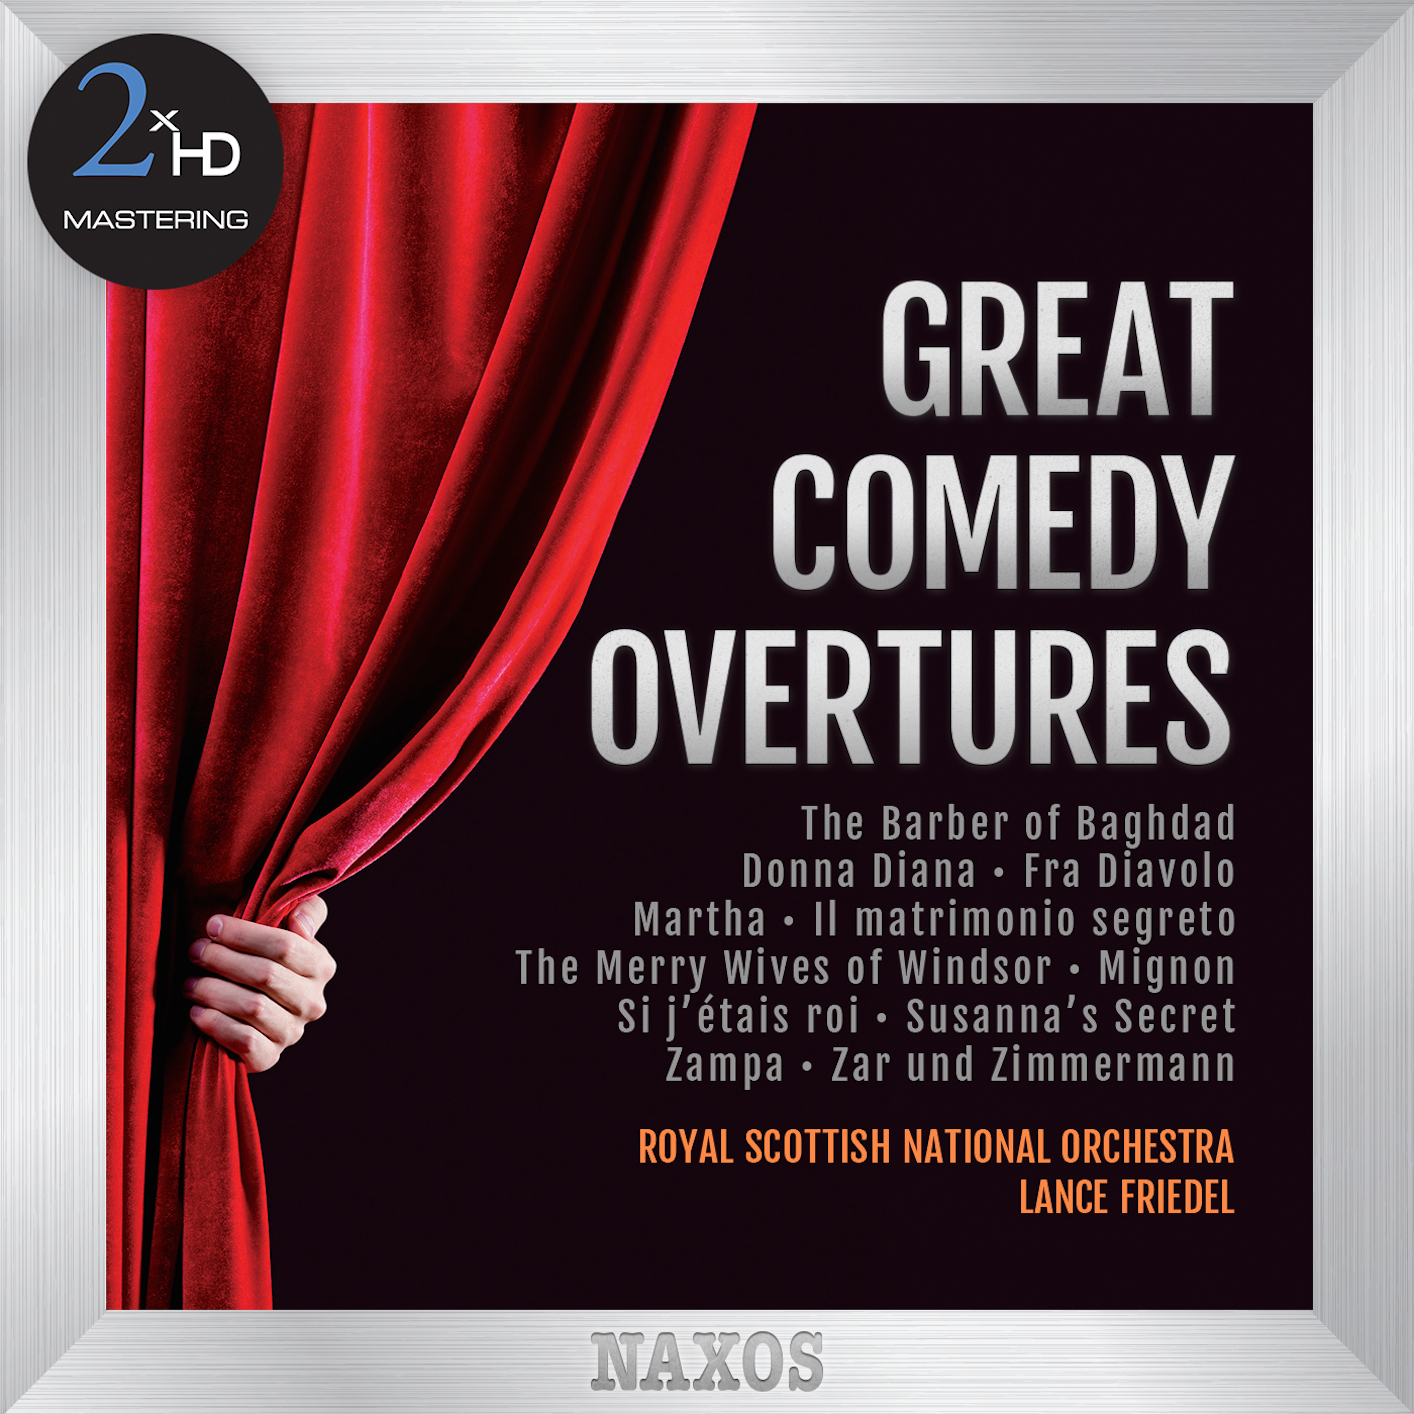 Royal Scottish National Orchestra & Lance Friedel - Great Comedy Overtures (2015) [FLAC 24bit/192kHz]